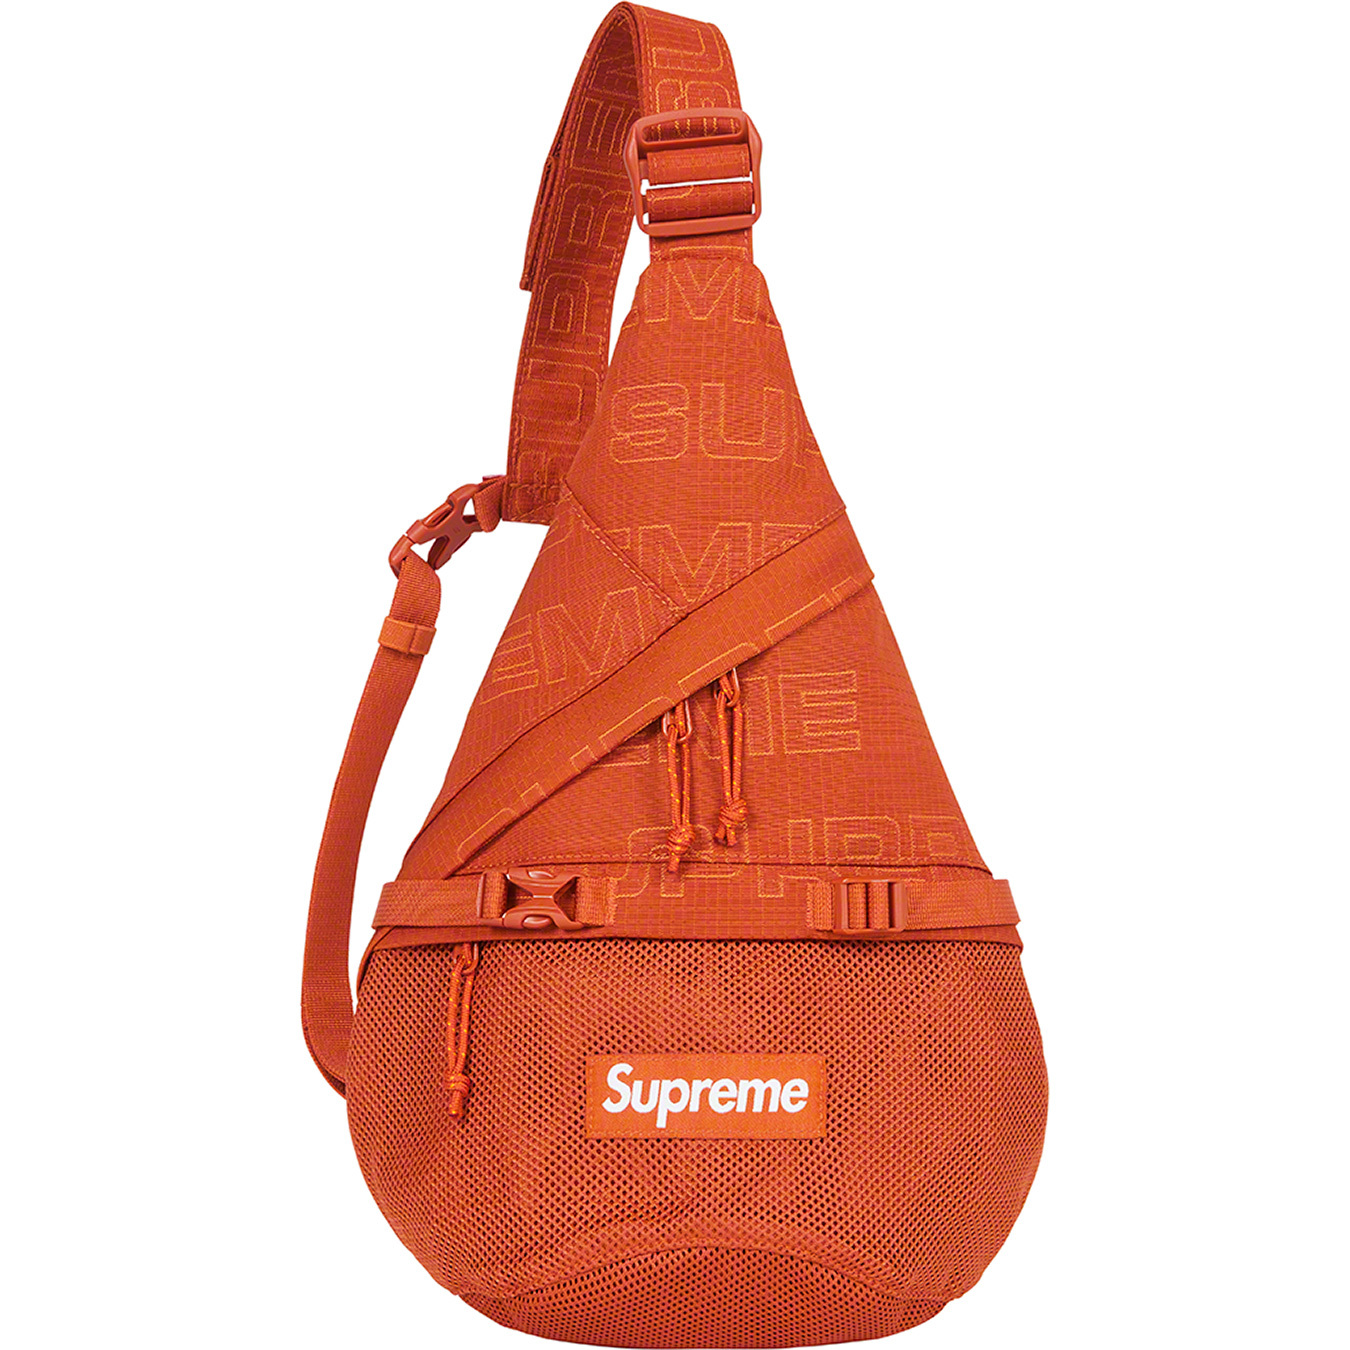 SUPREME FW20 SLING BAG! EVERYTHING YOU NEED TO KNOW! 